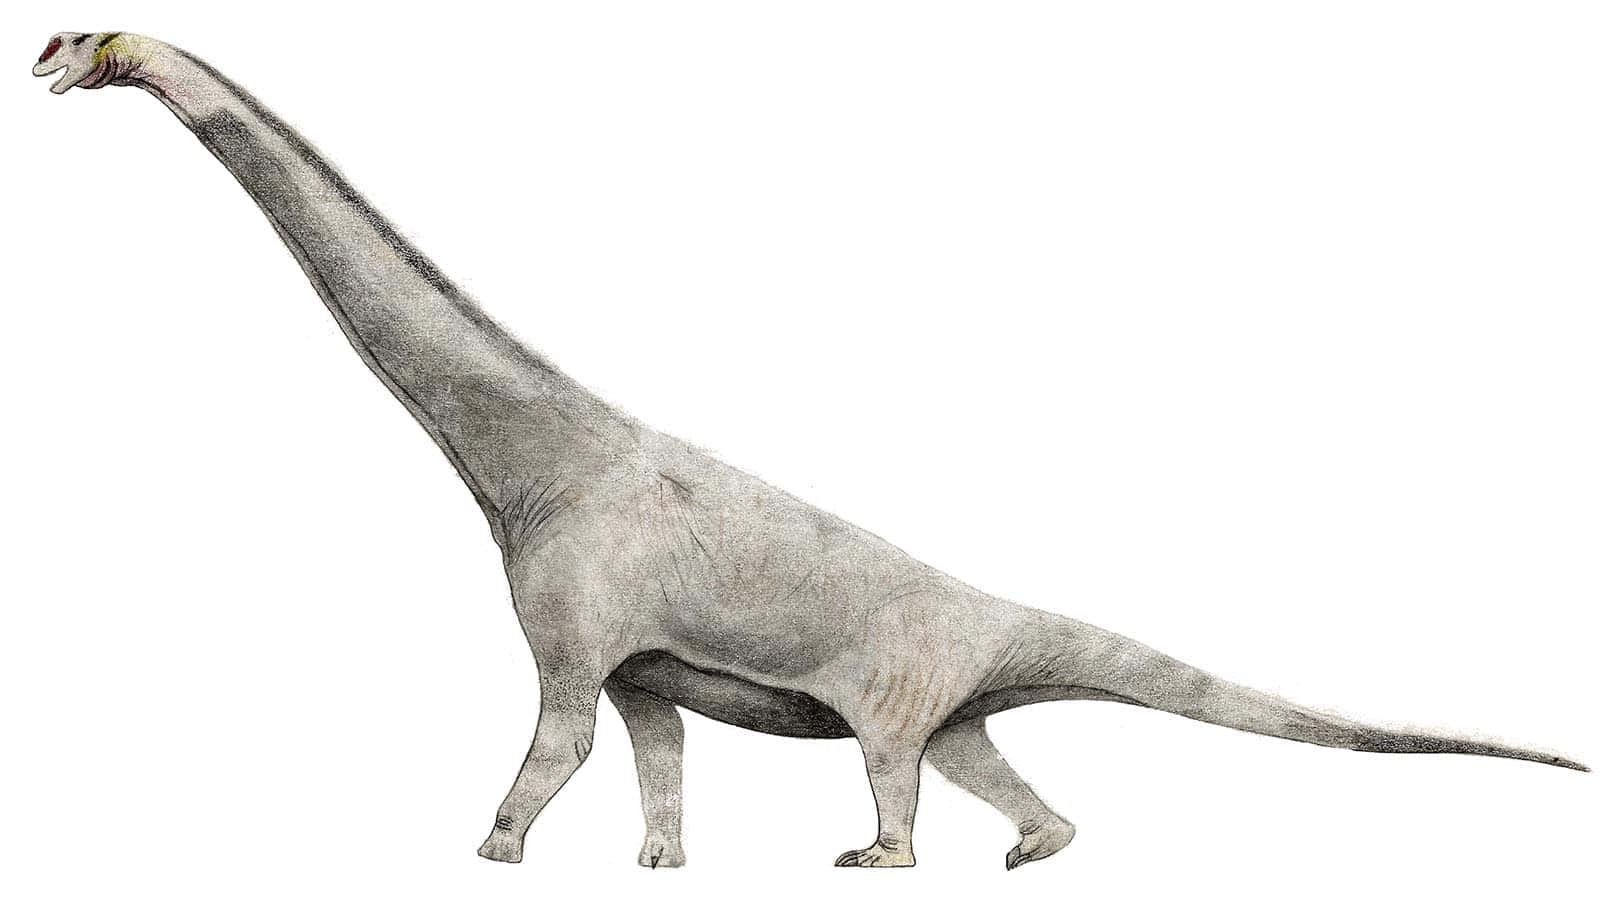 a large dinosaur with long legs and a long neck